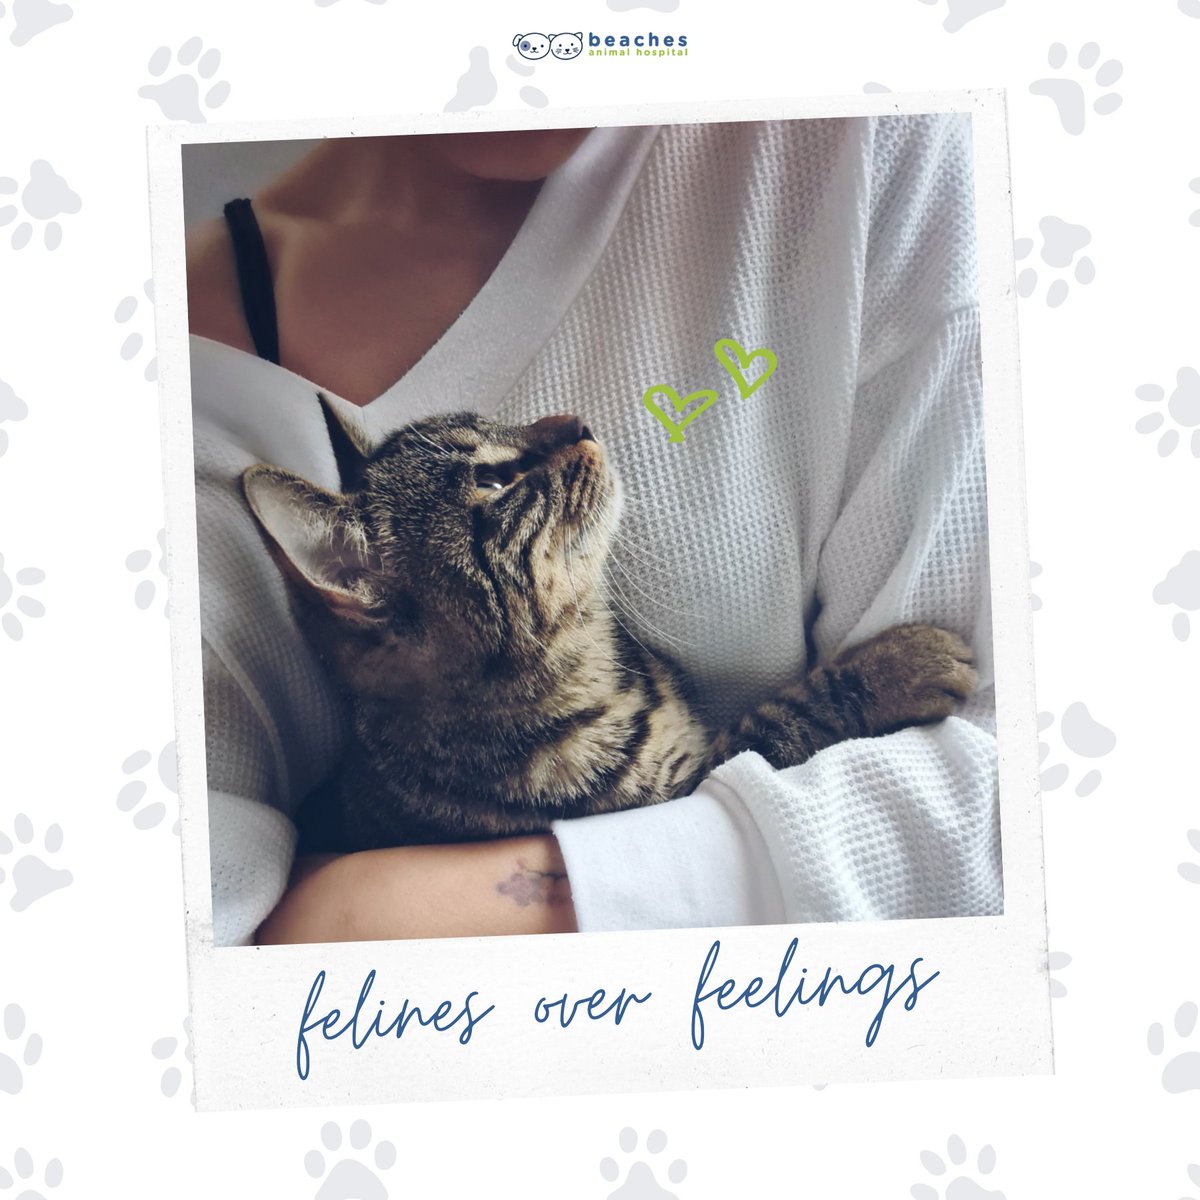 Felines over feelings: because who needs emotions when you have whiskers and purrs? 😺💖 #CatLove #PawsAndPurrs

#love #instagood #cute #pet #petstagram #photooftheday #instamood #adorable #instapet